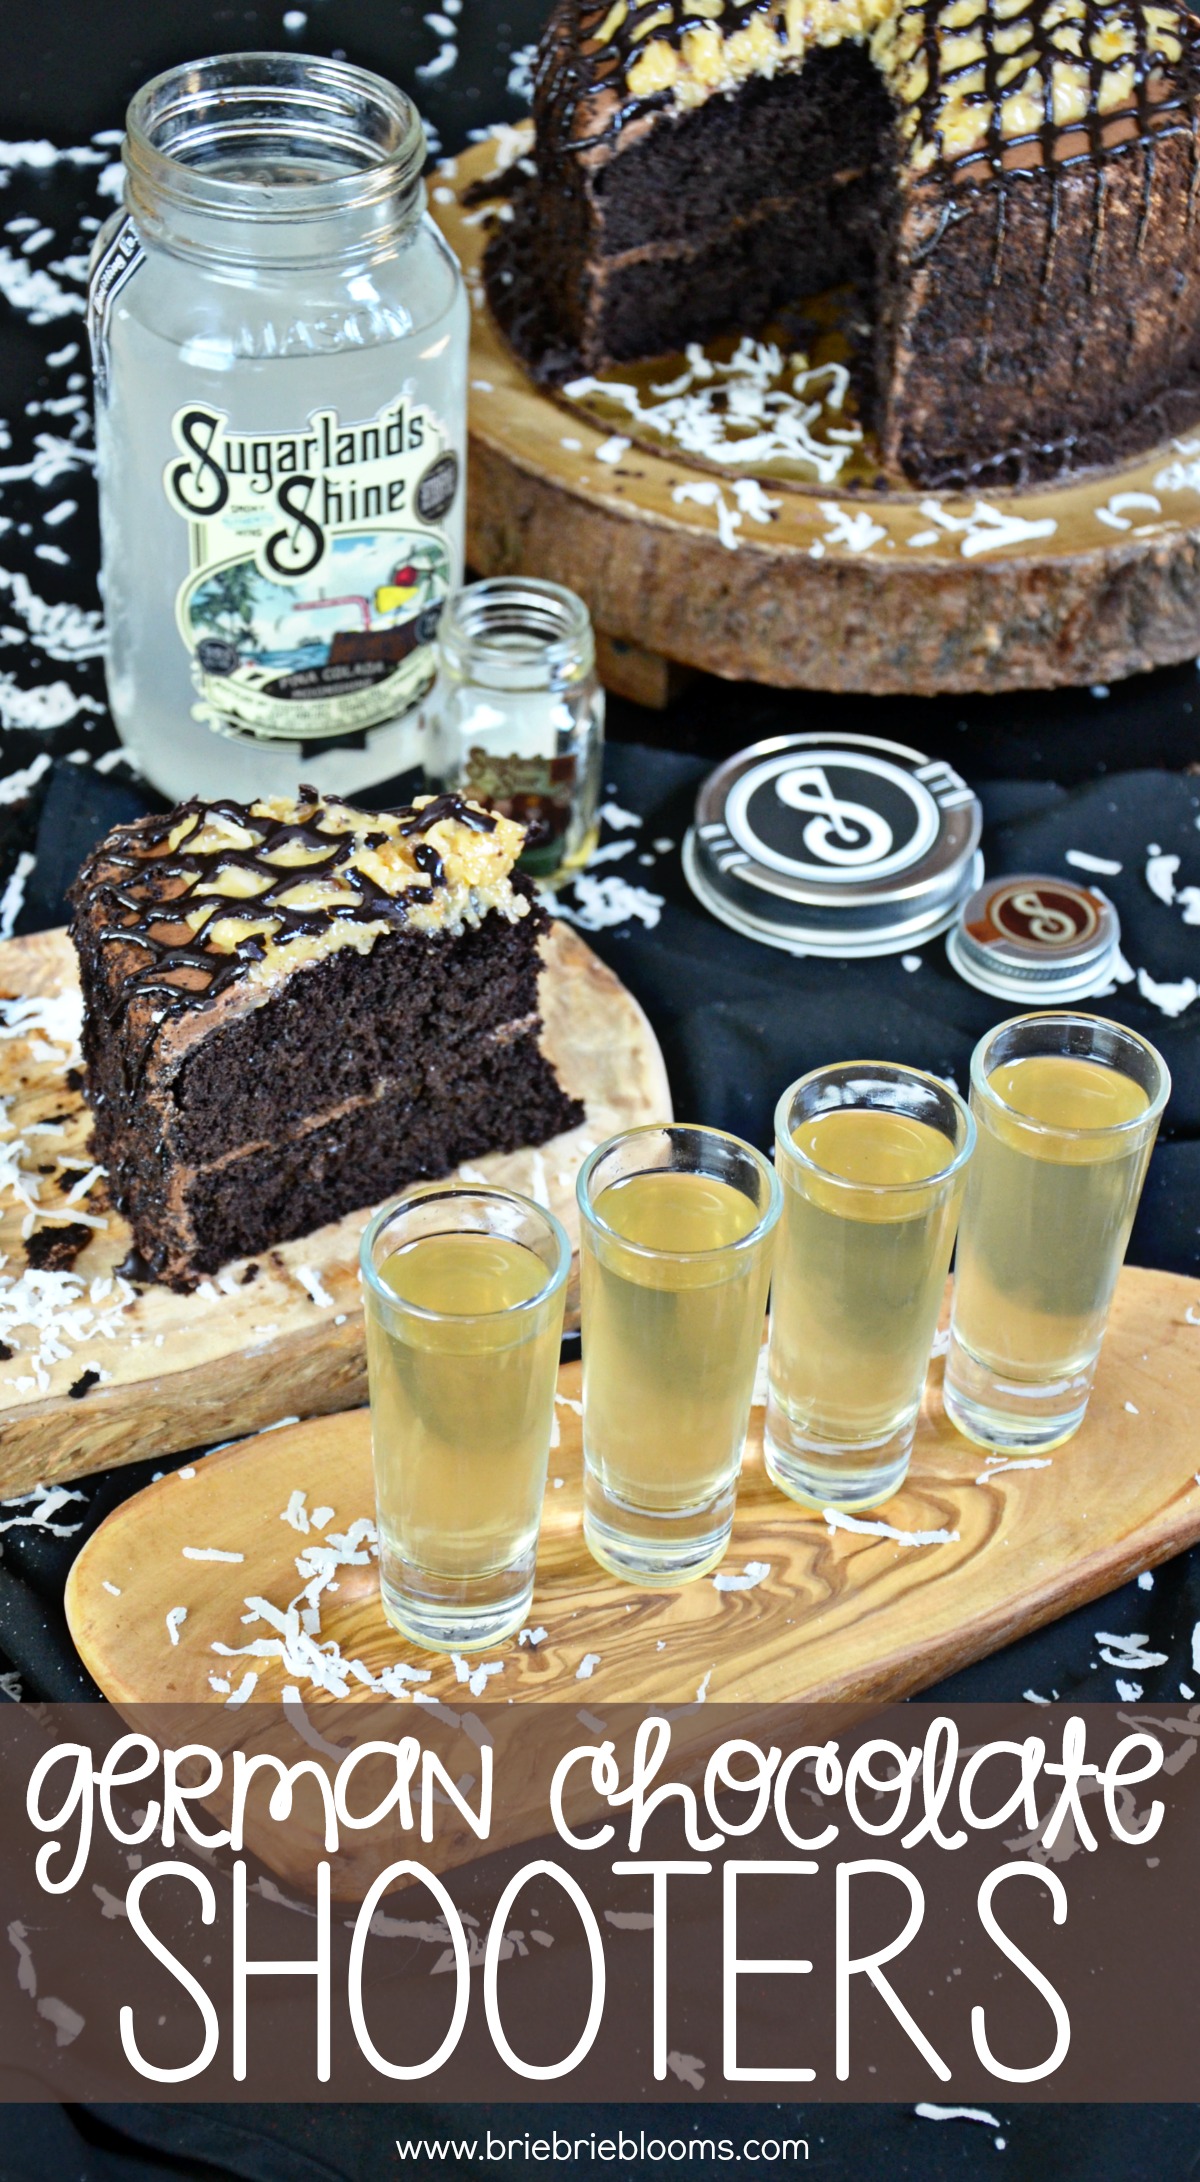 Make these easy german chocolate shooters with Pina Colada moonshine and Hazelnut rum to share with friends.